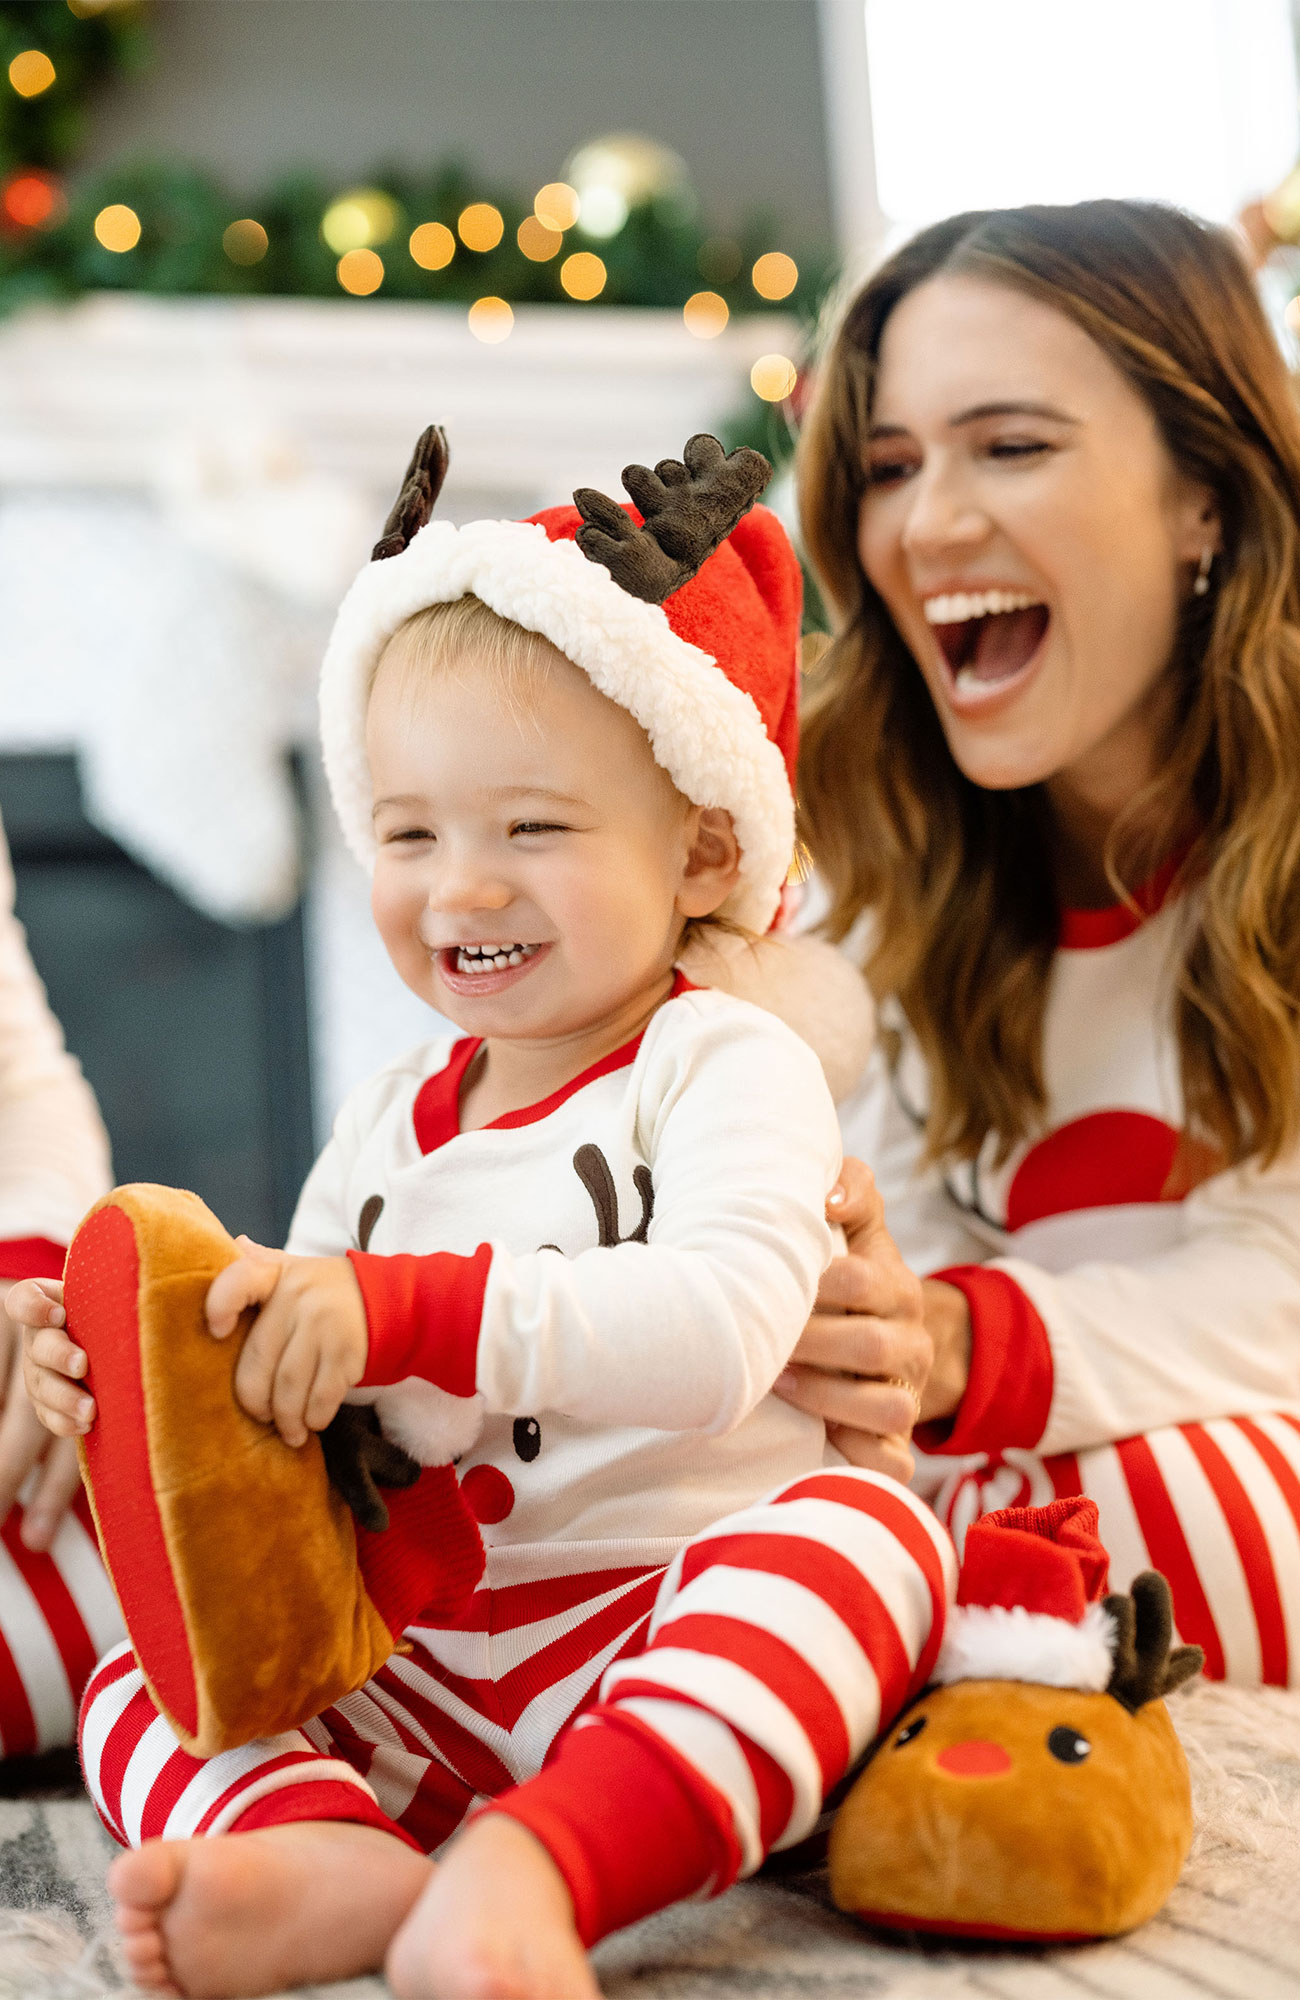 So Cute! Mandy Moore Stars in Holiday Ad With Husband Taylor, Son Gus: Pics